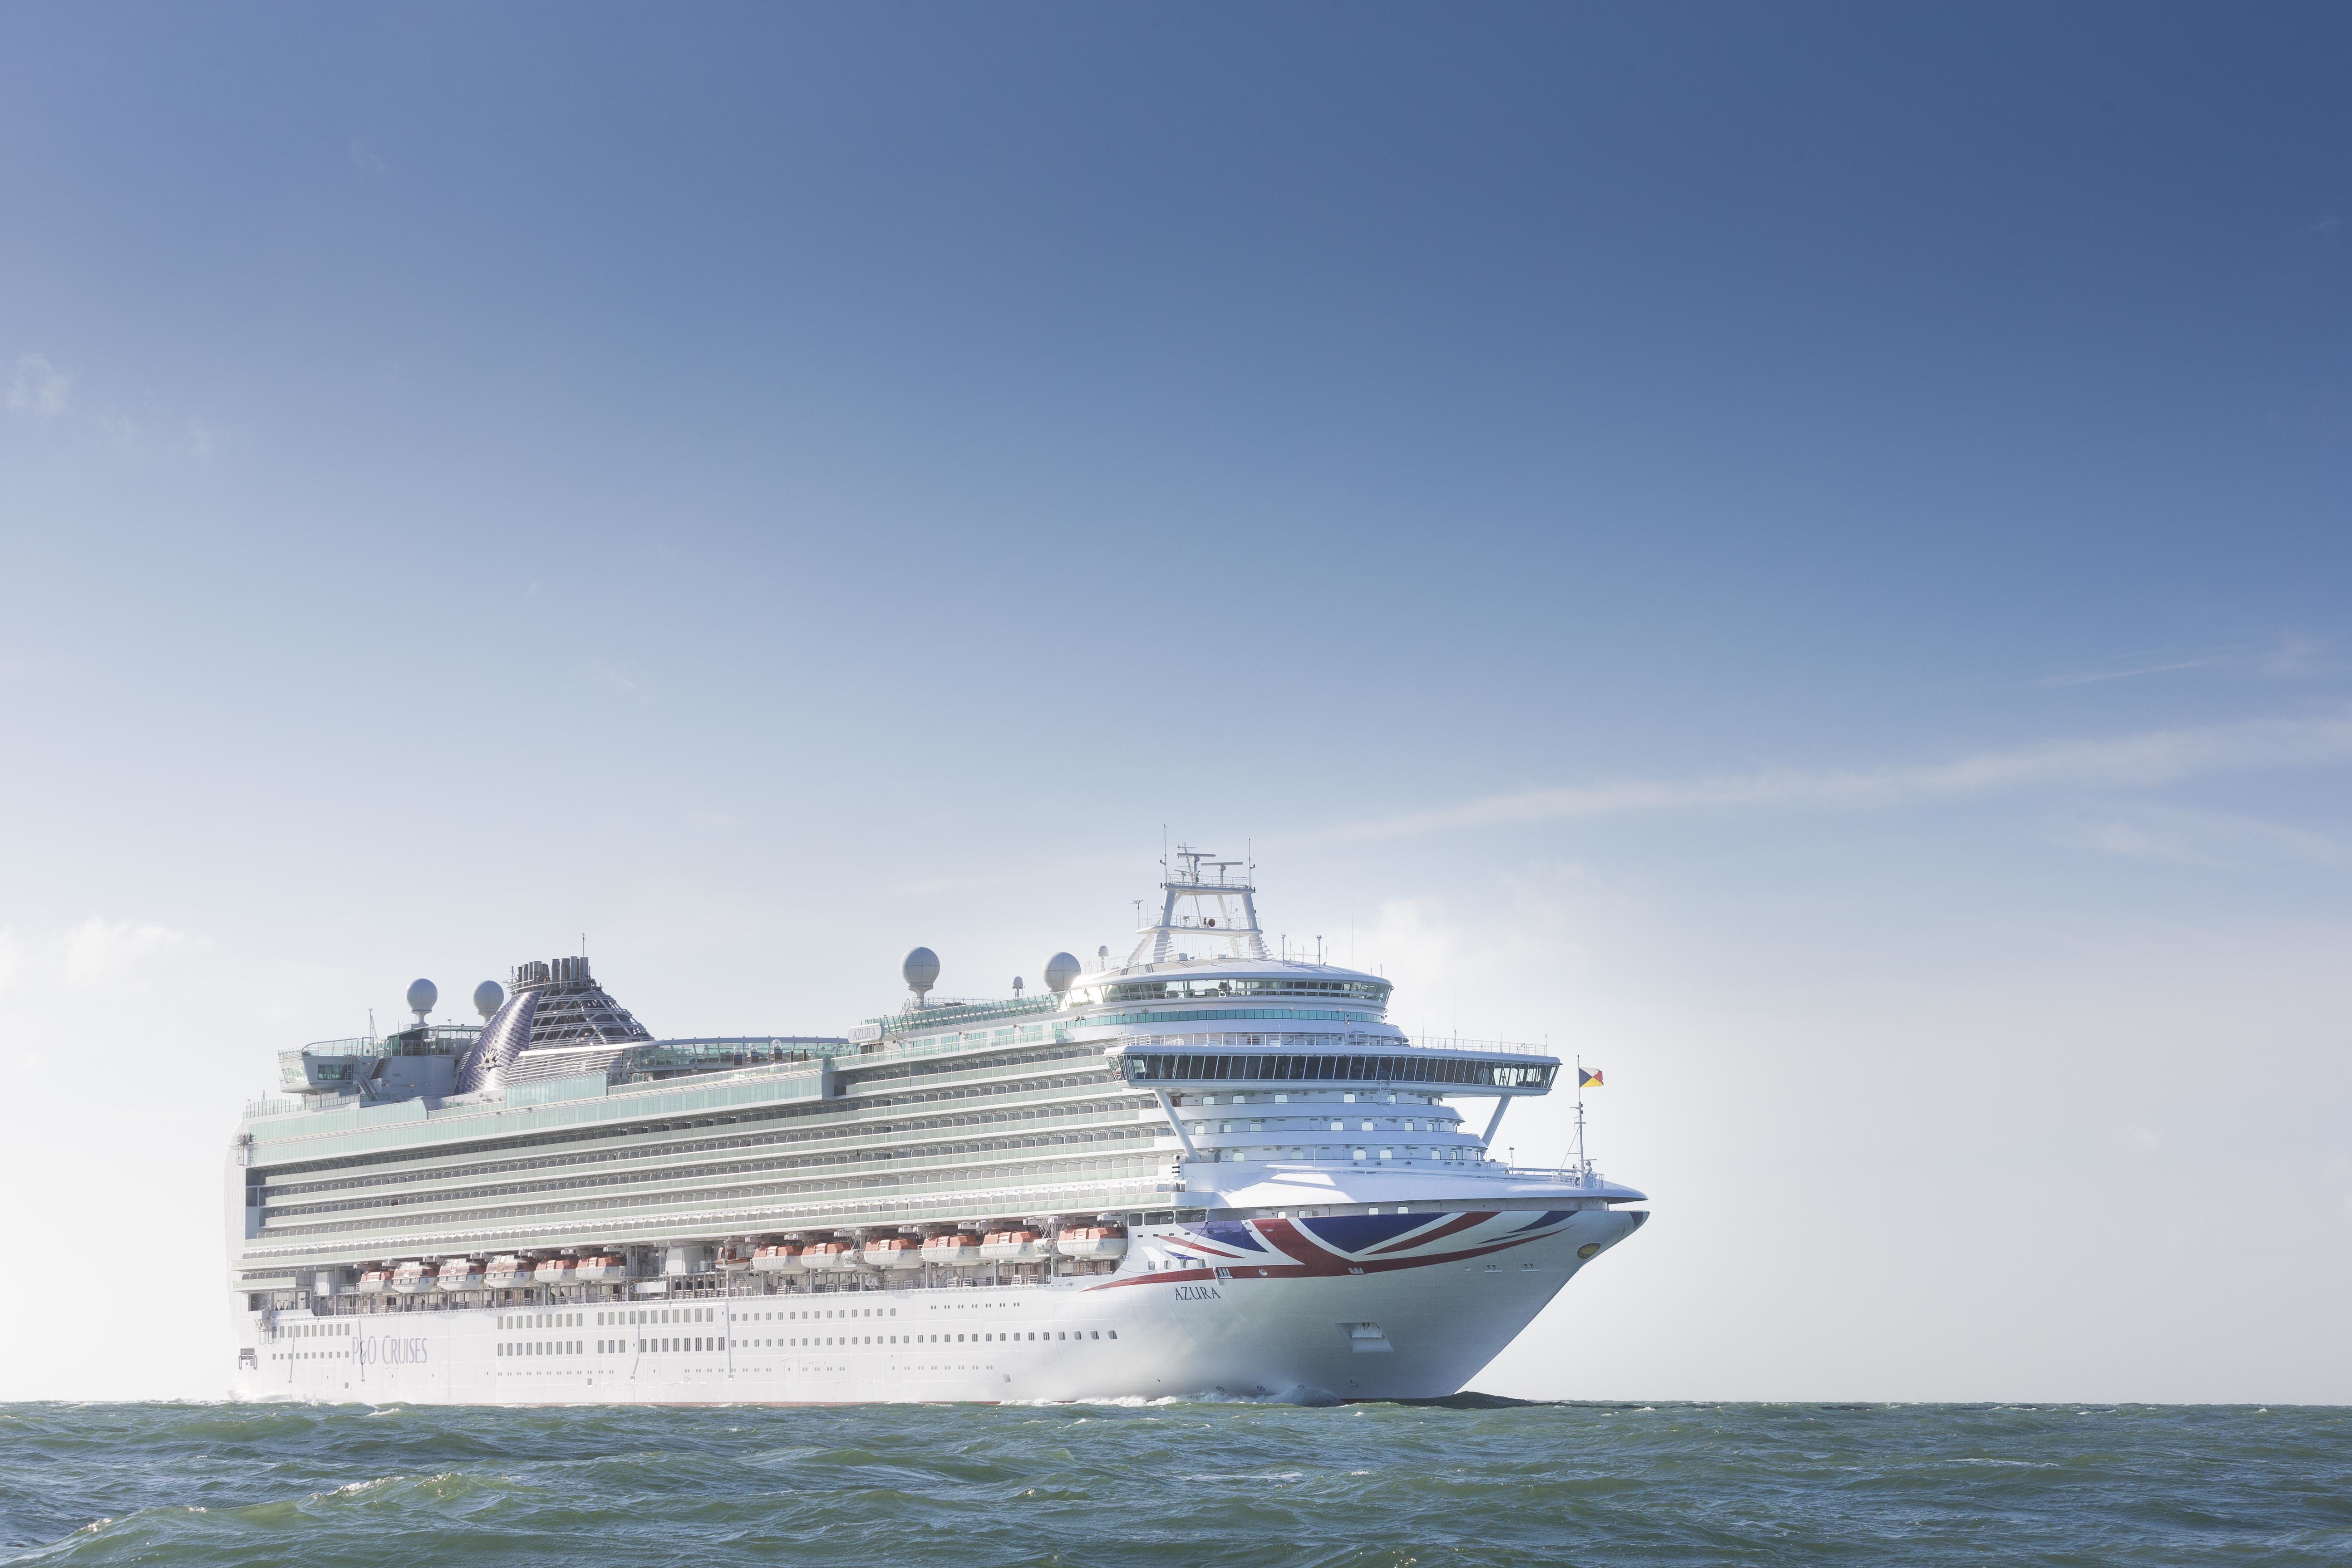 Carnival Corporation & plc contracts Bureau Veritas to support a return to cruising